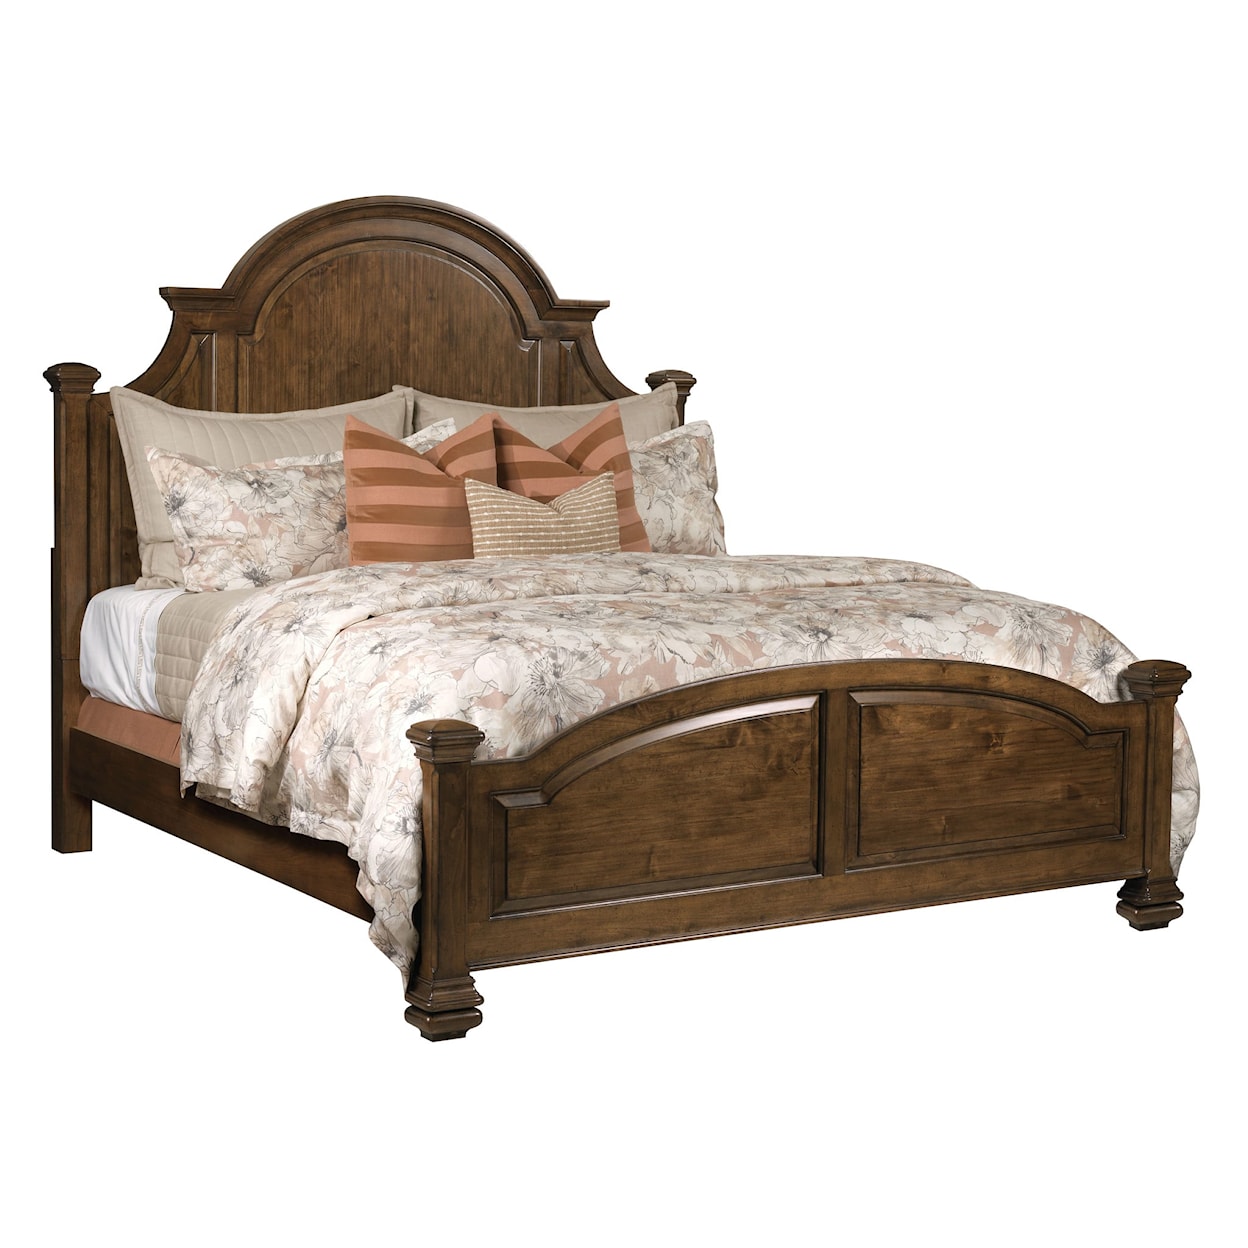 Kincaid Furniture Commonwealth Allenby Cal King Panel Bed